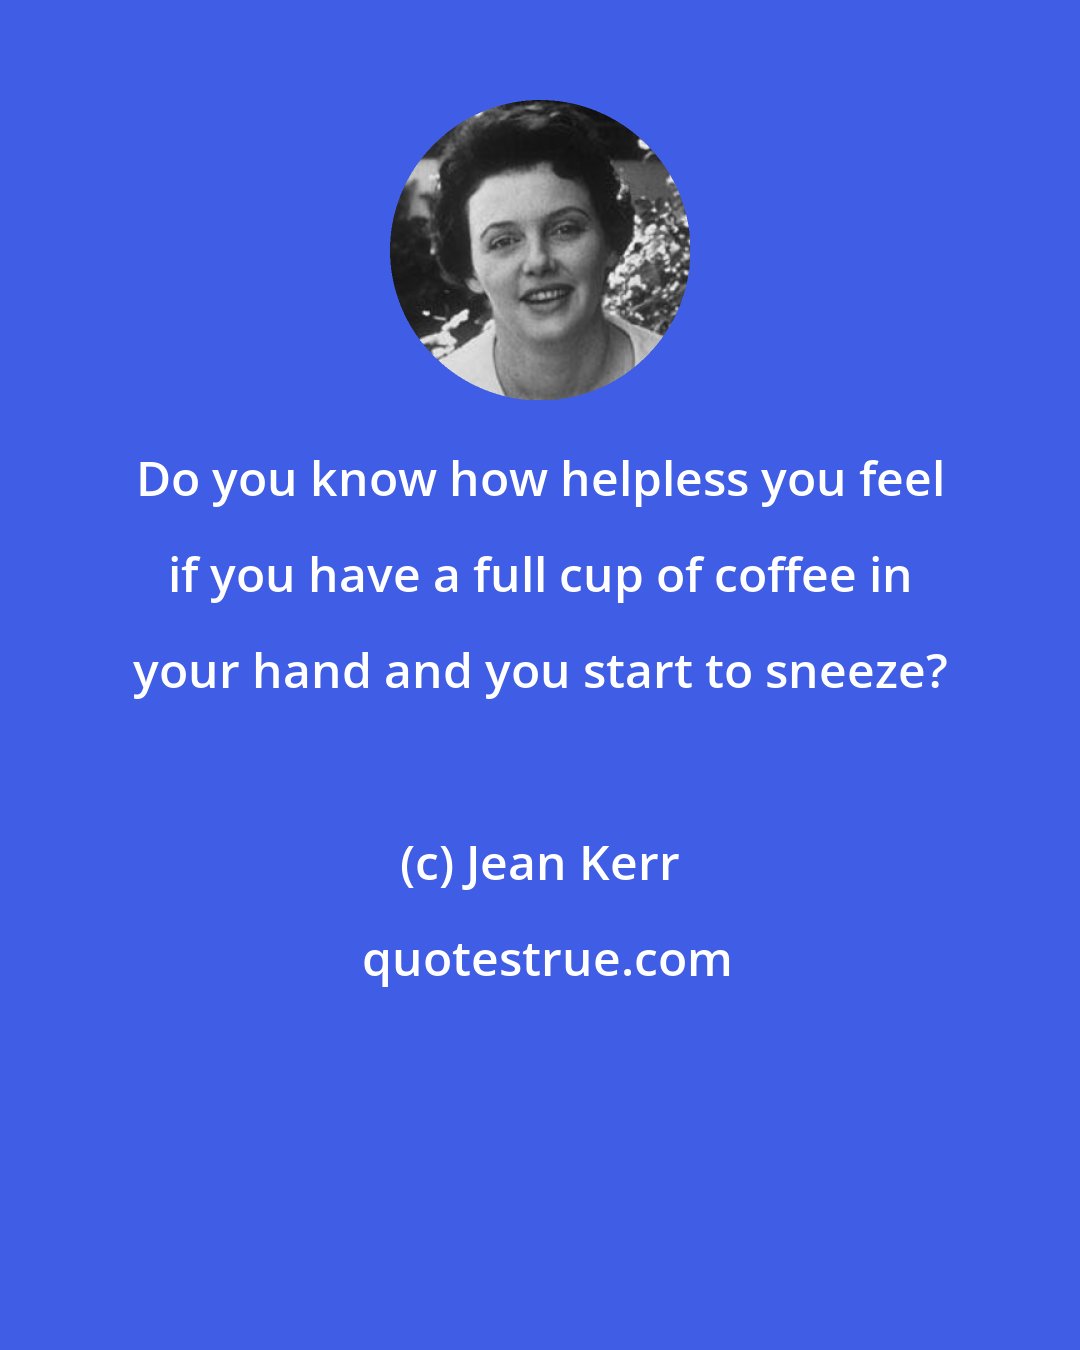 Jean Kerr: Do you know how helpless you feel if you have a full cup of coffee in your hand and you start to sneeze?